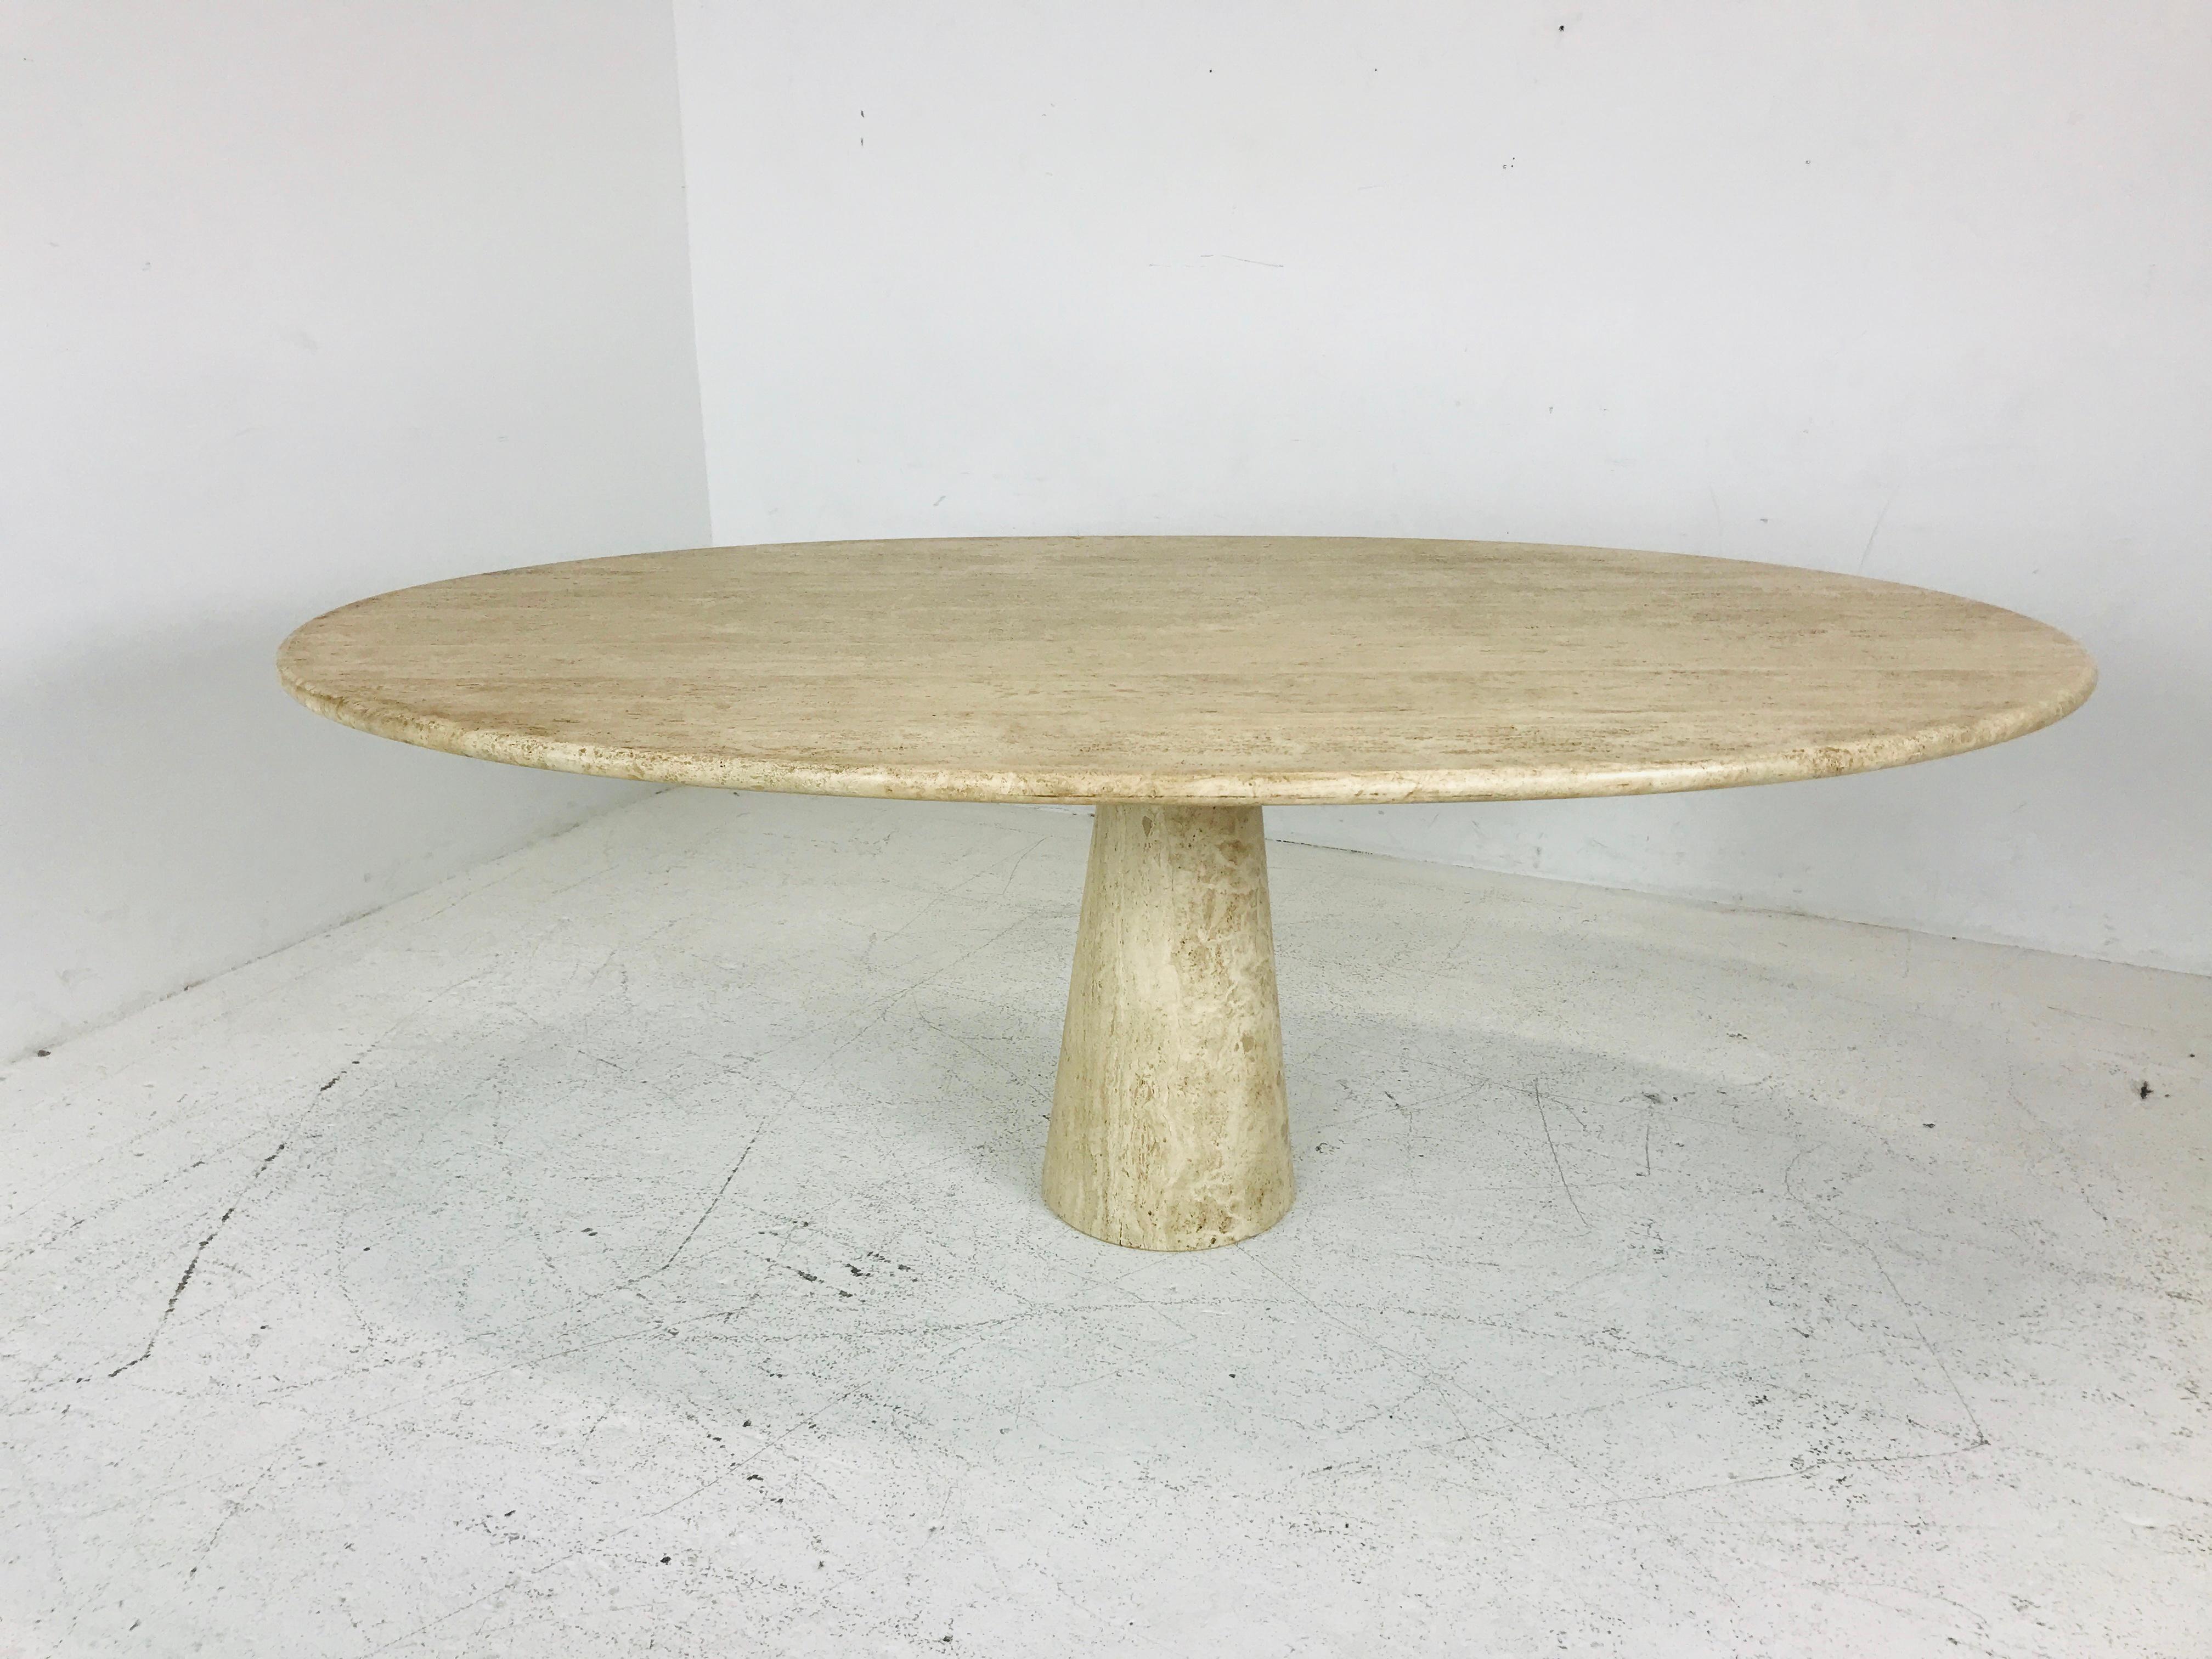 Angelo Mangiarotti style travertine marble oval dining table. Table is in good vintage condition.
The table top removes from the base for more convenient transport--each piece weighing approximately 250 pounds for a total of 500